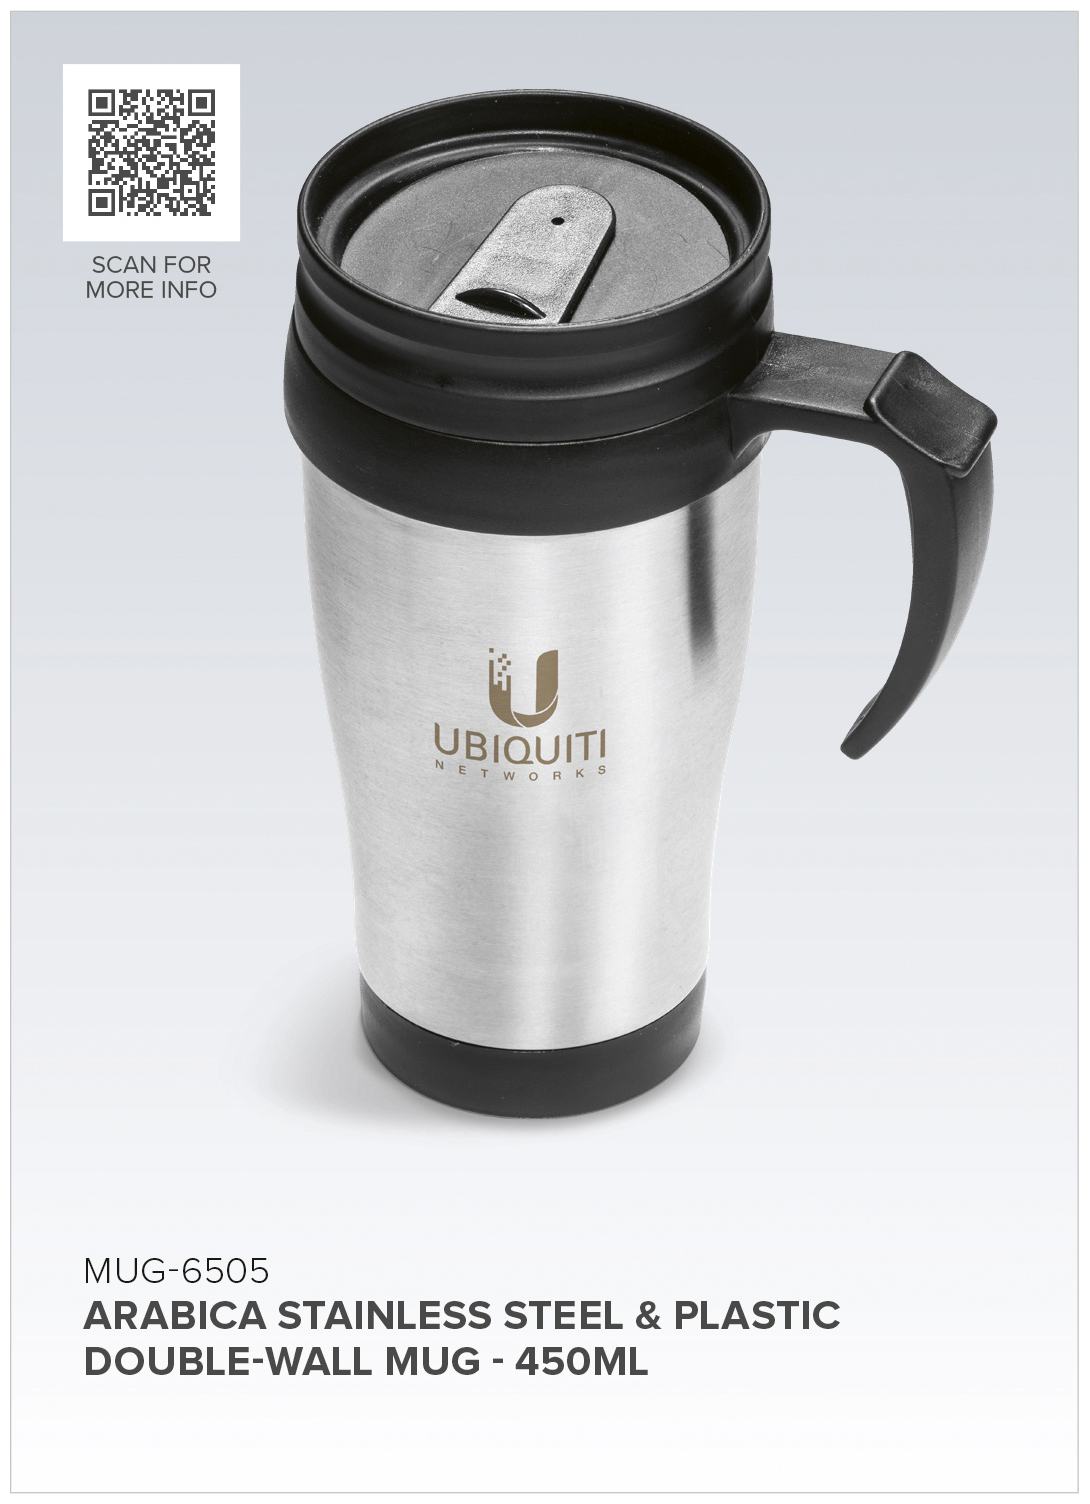 Arabica Stainless Steel & Plastic Double-Wall Mug - 450ml CATALOGUE_IMAGE